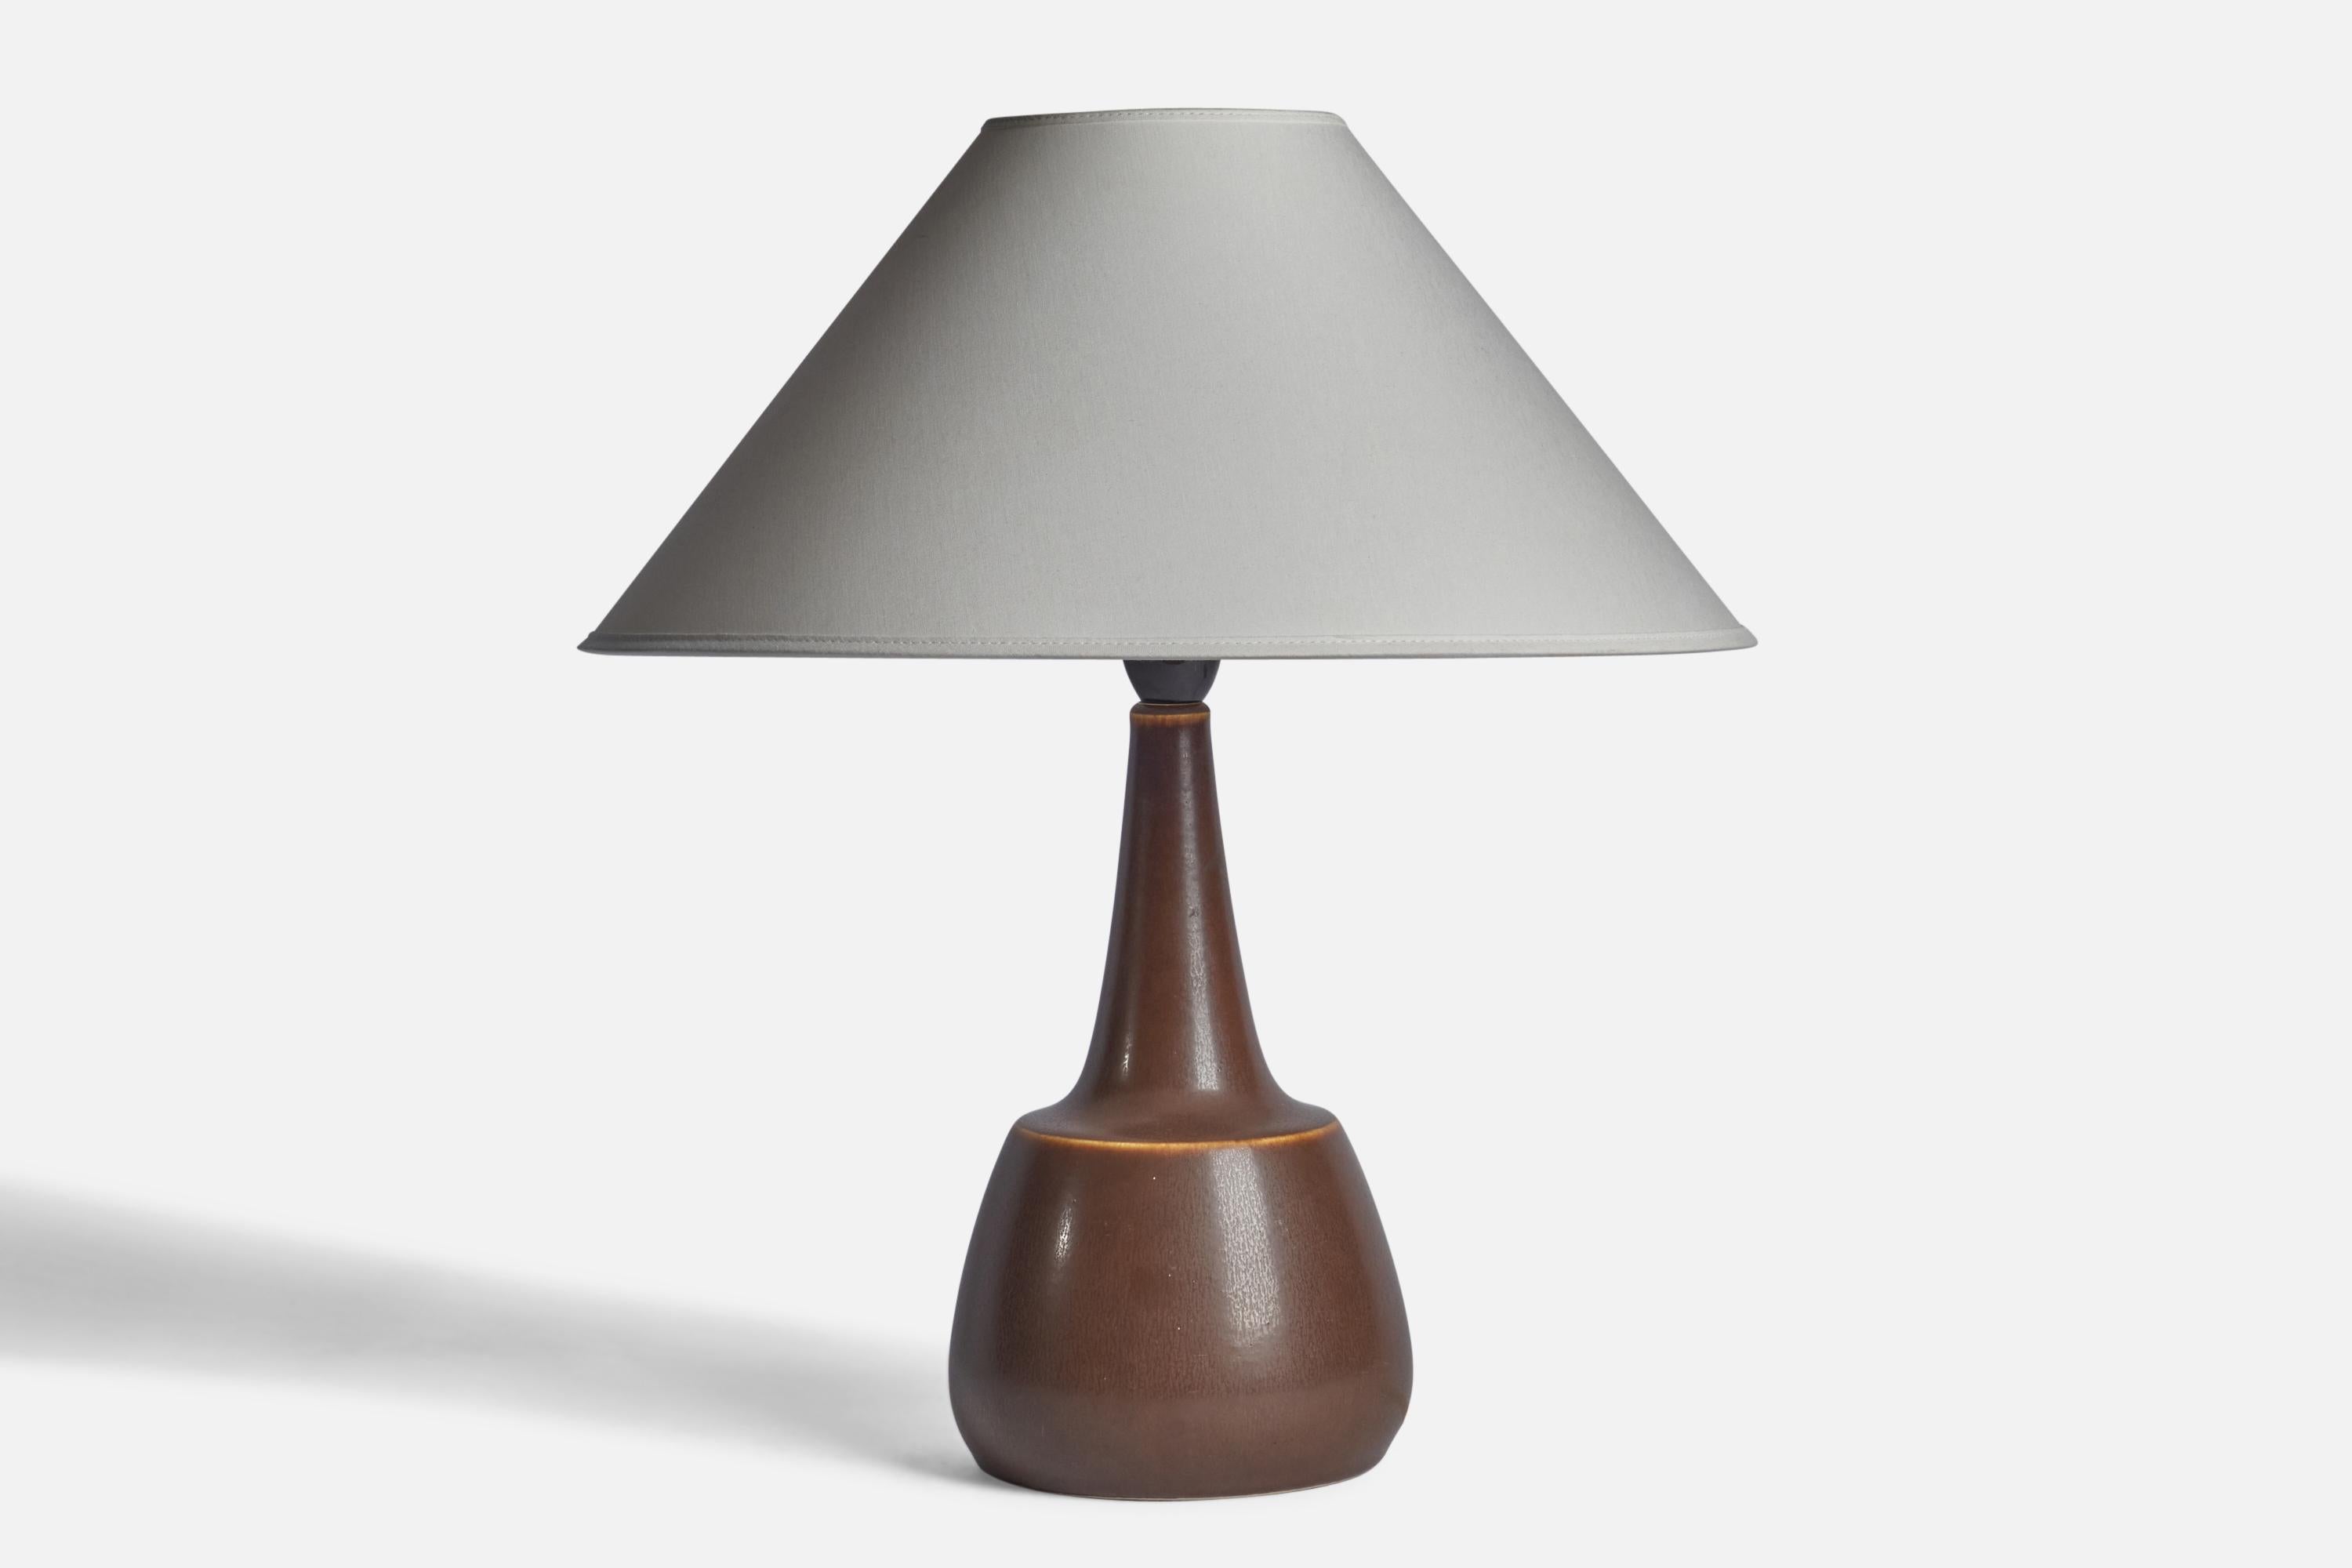 A brown-glazed stoneware table lamp designed by Per & Annelise Linneman-Schmidt and produced by Palshus, Denmark, 1960s

Dimensions of Lamp (inches): 13.75